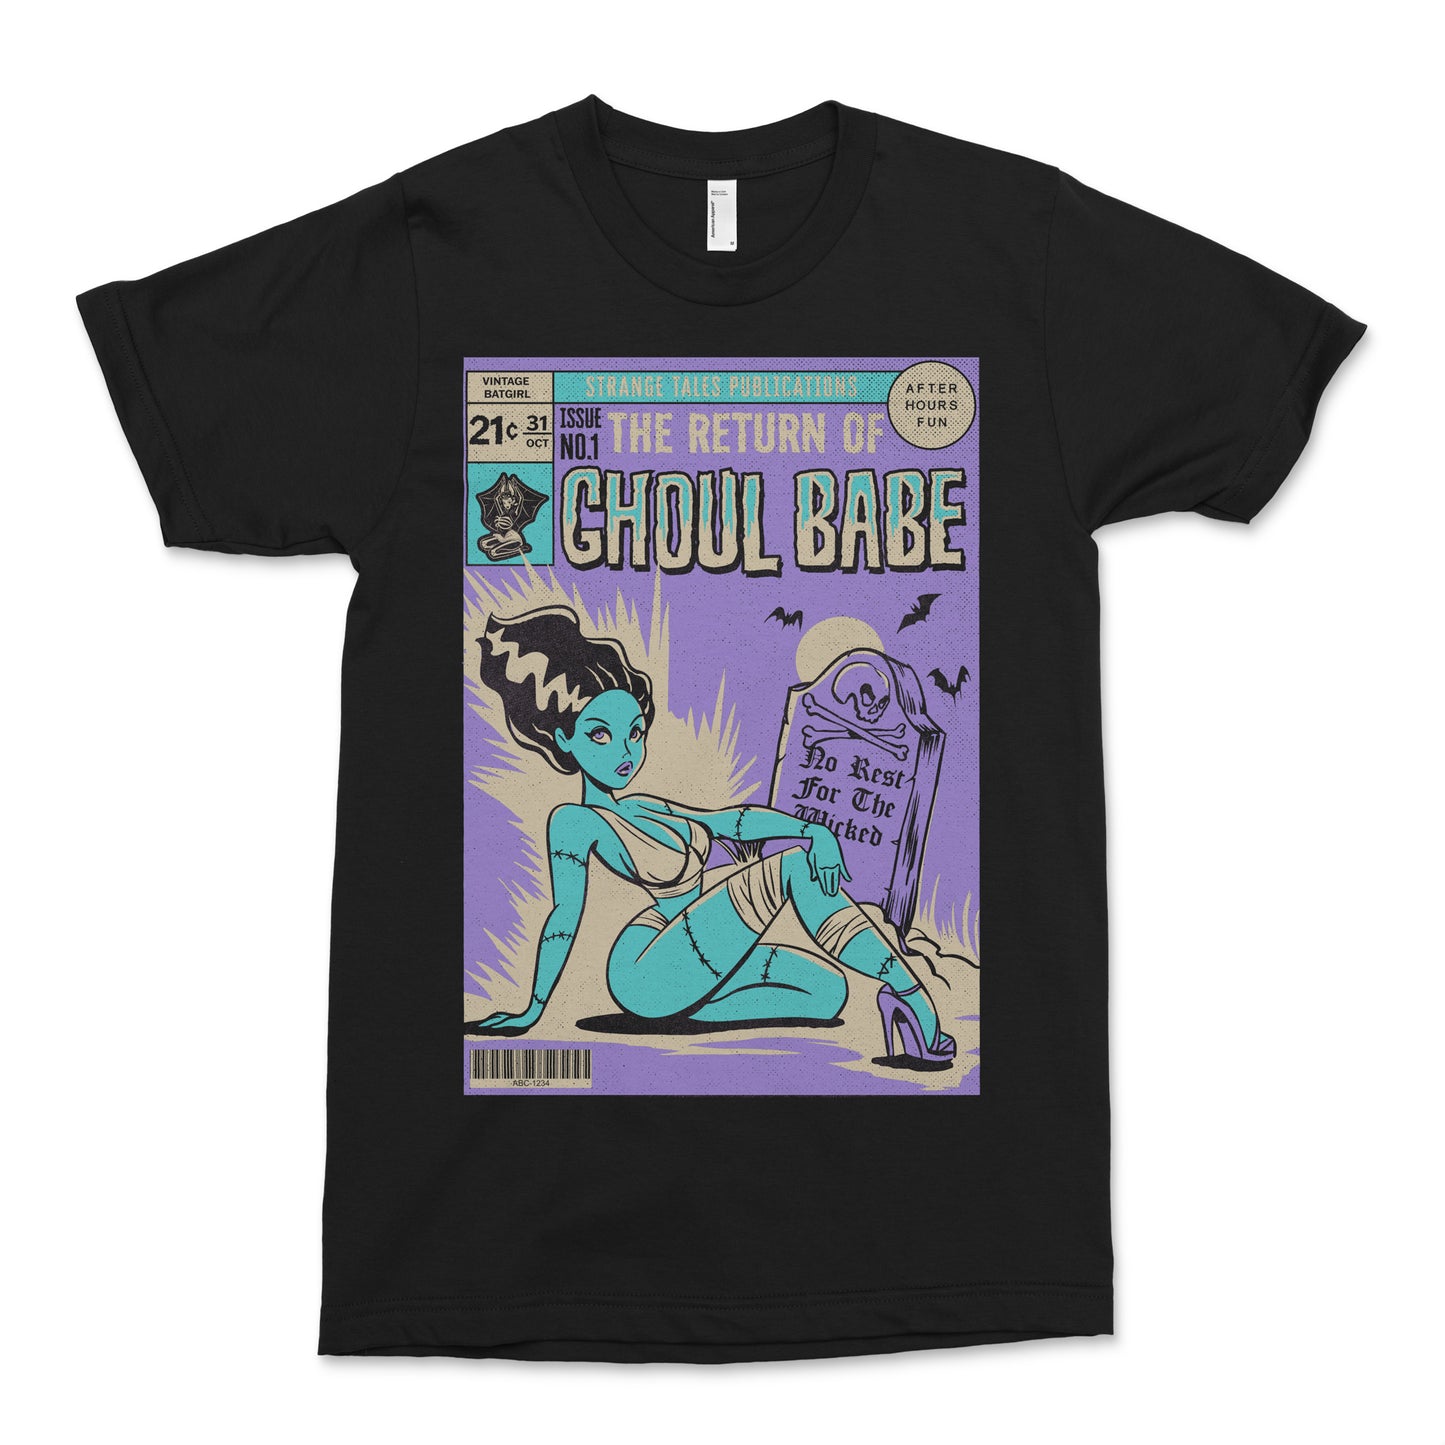 Ghoul Babe T-shirt